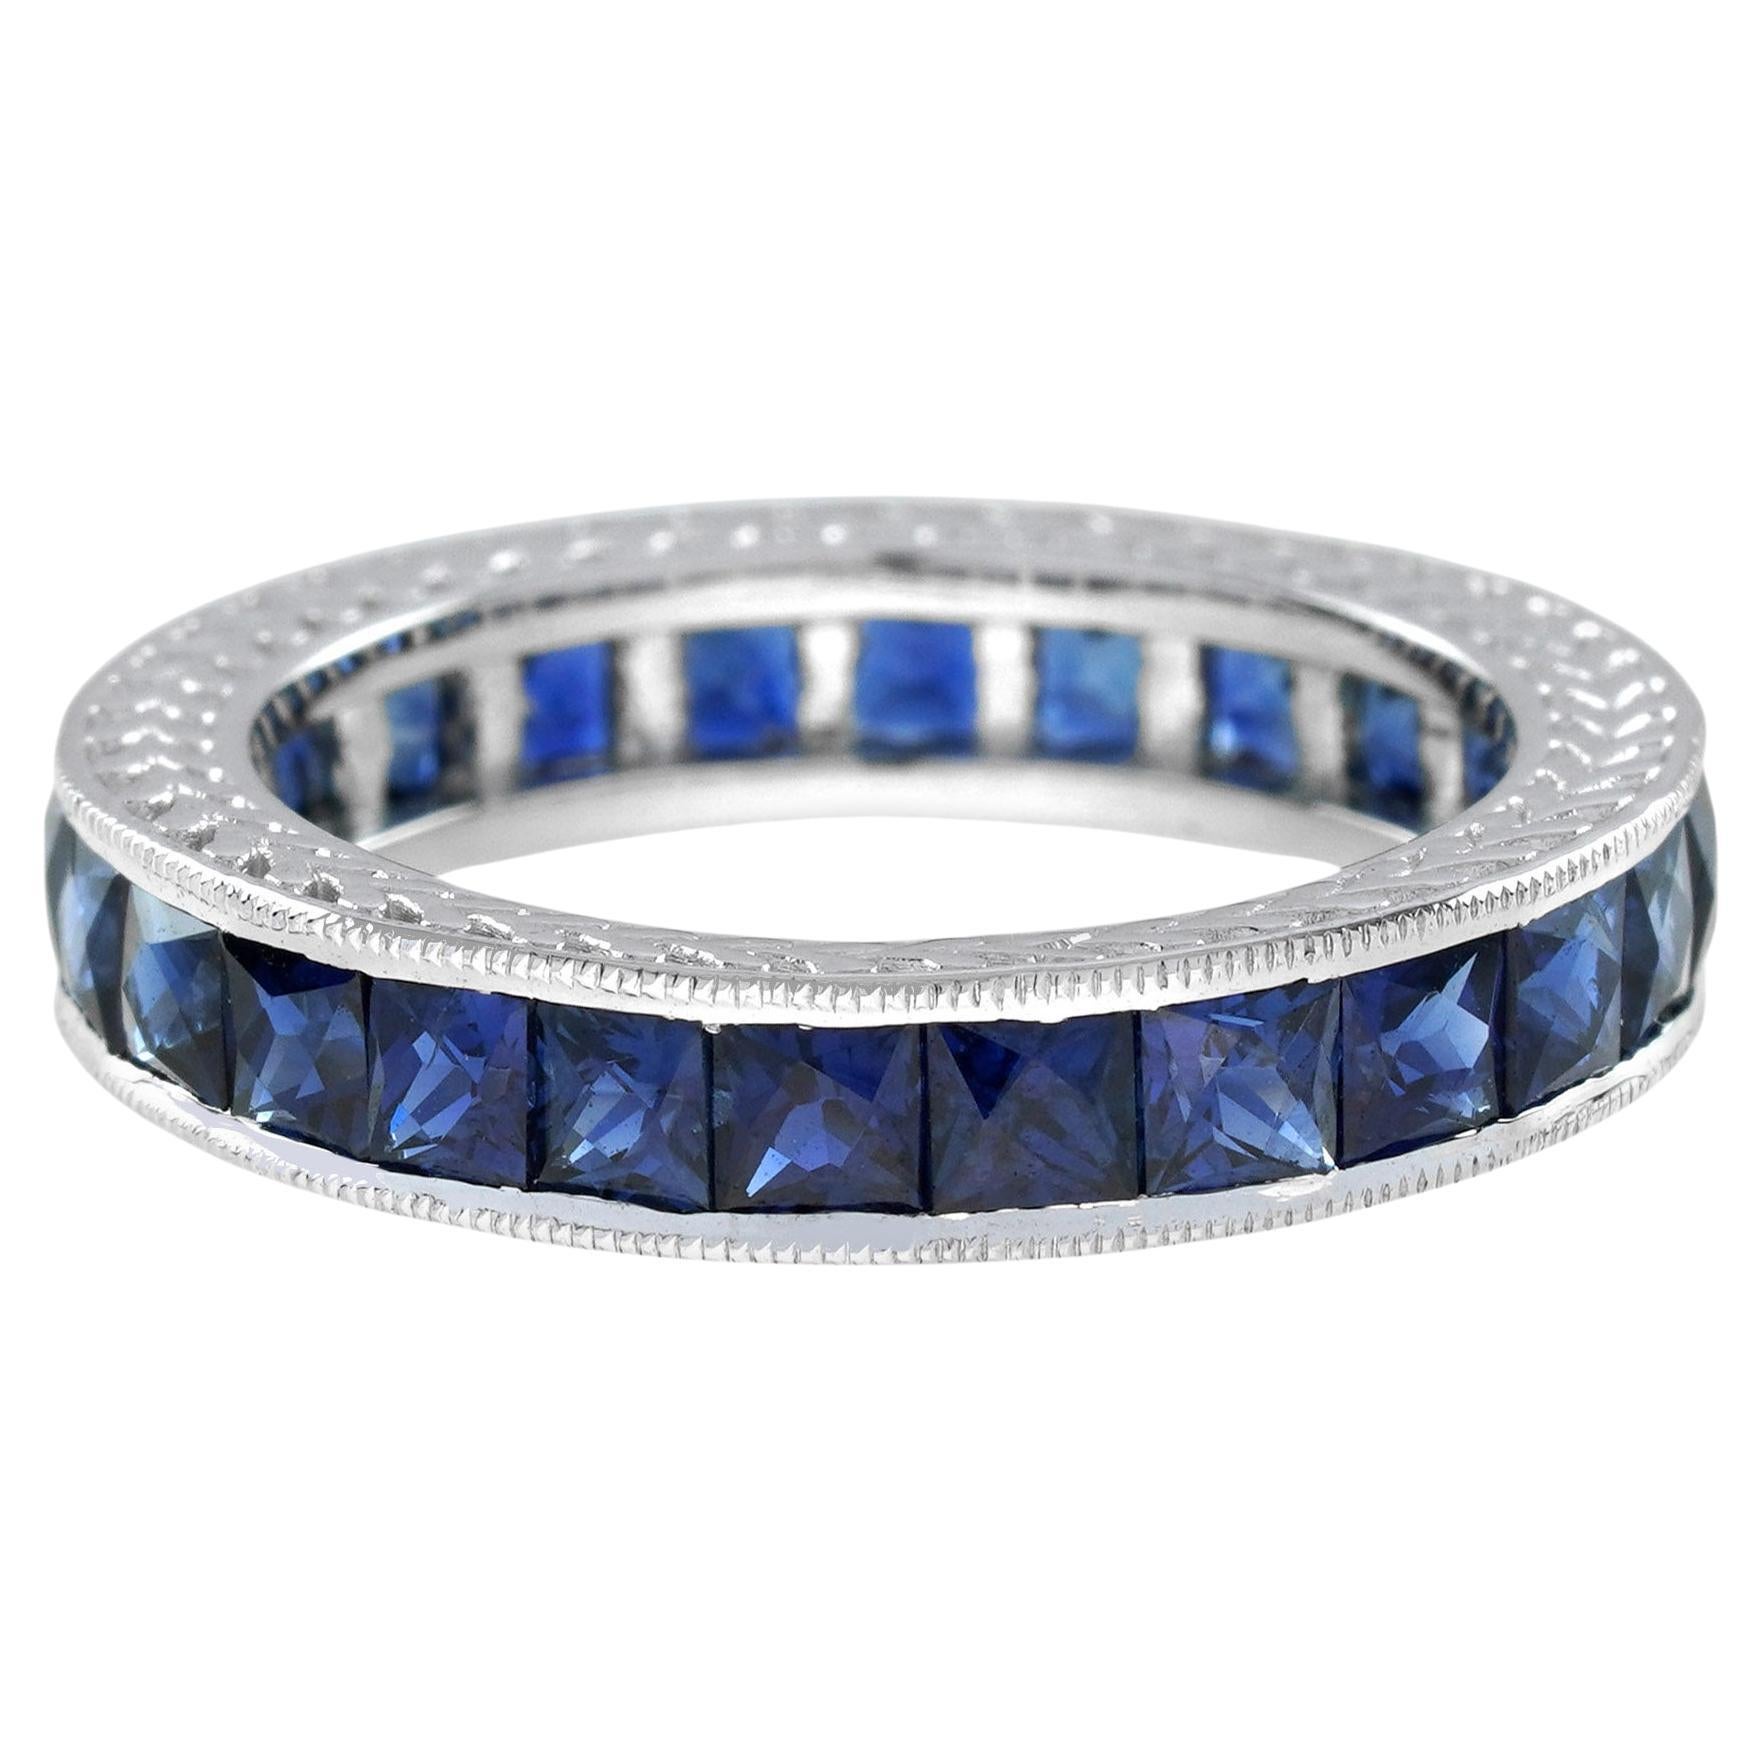 3.25 Ct. Blue Sapphire Antique Style Eternity Band Ring in Platinum 950